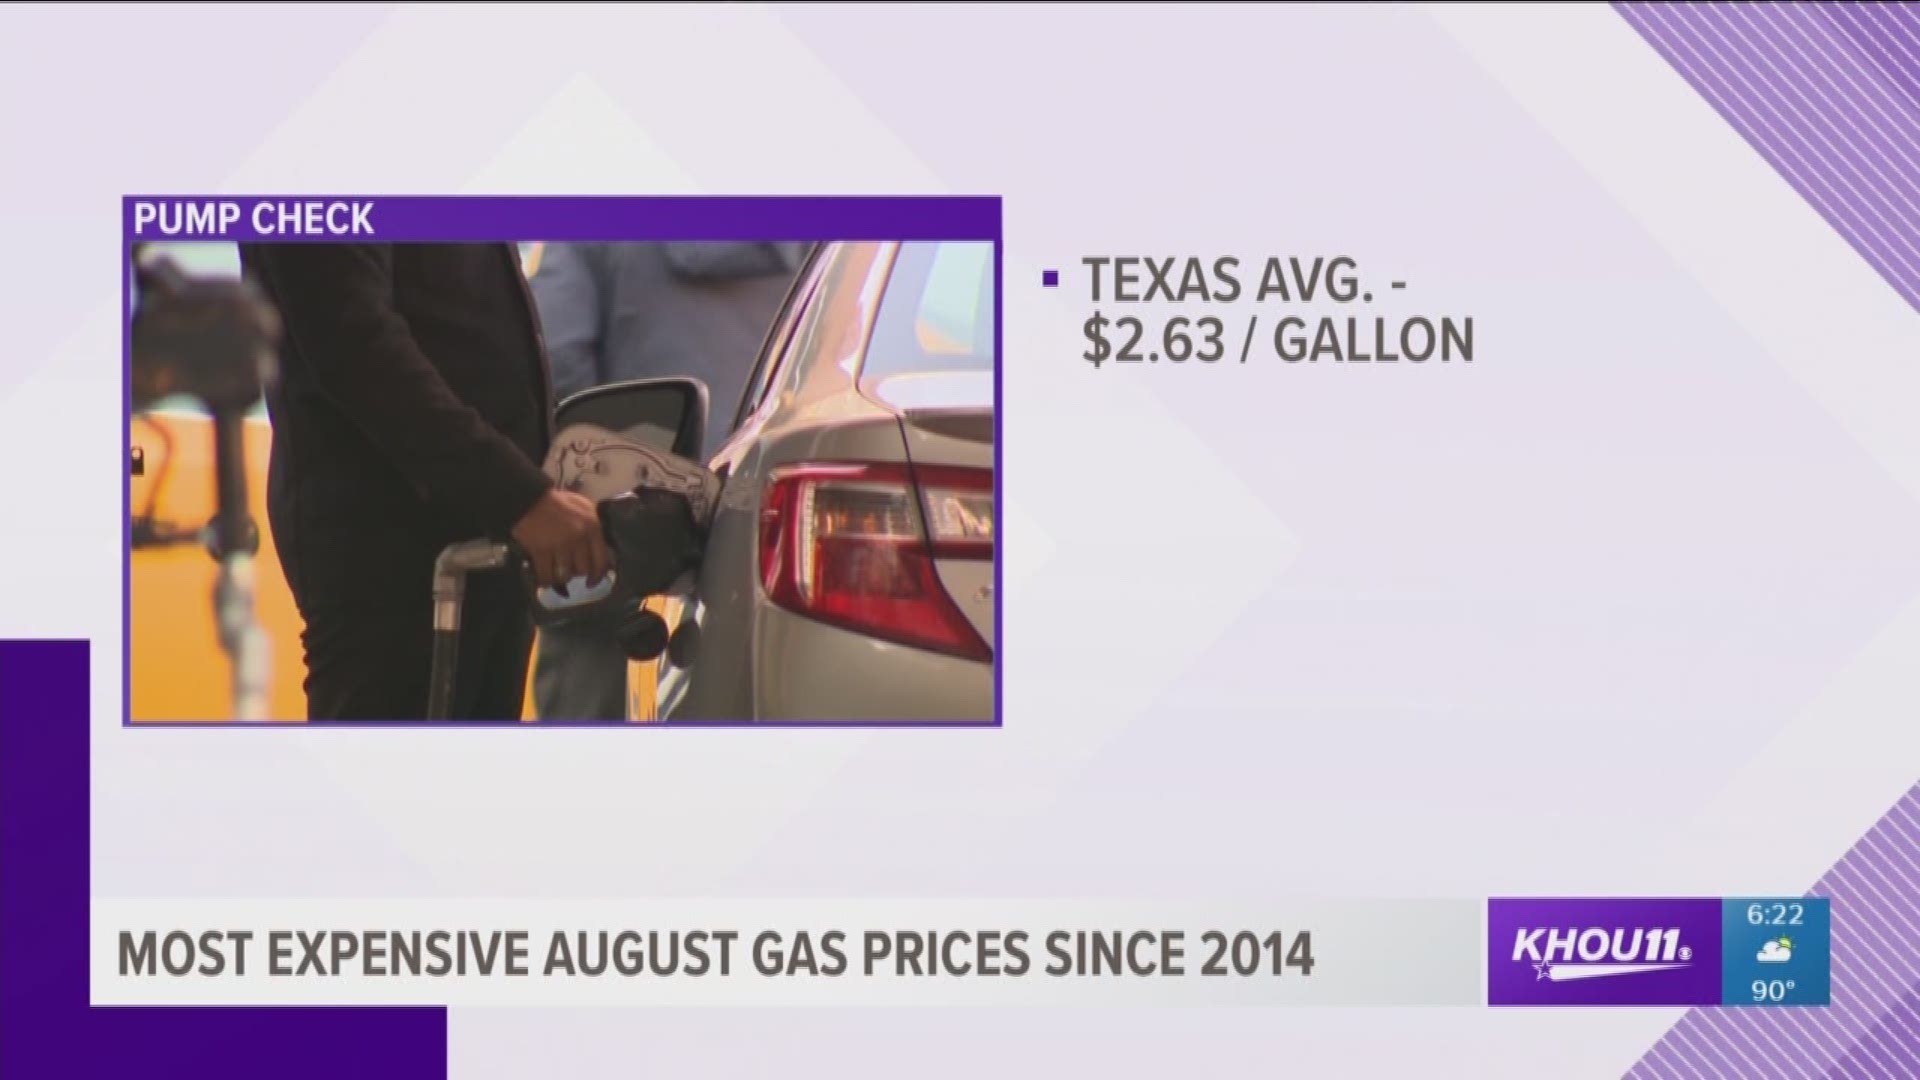 The average retail gasoline price in Texas fell by rose 2 cents per gallon this week but remain the most expensive August prices since 2014.